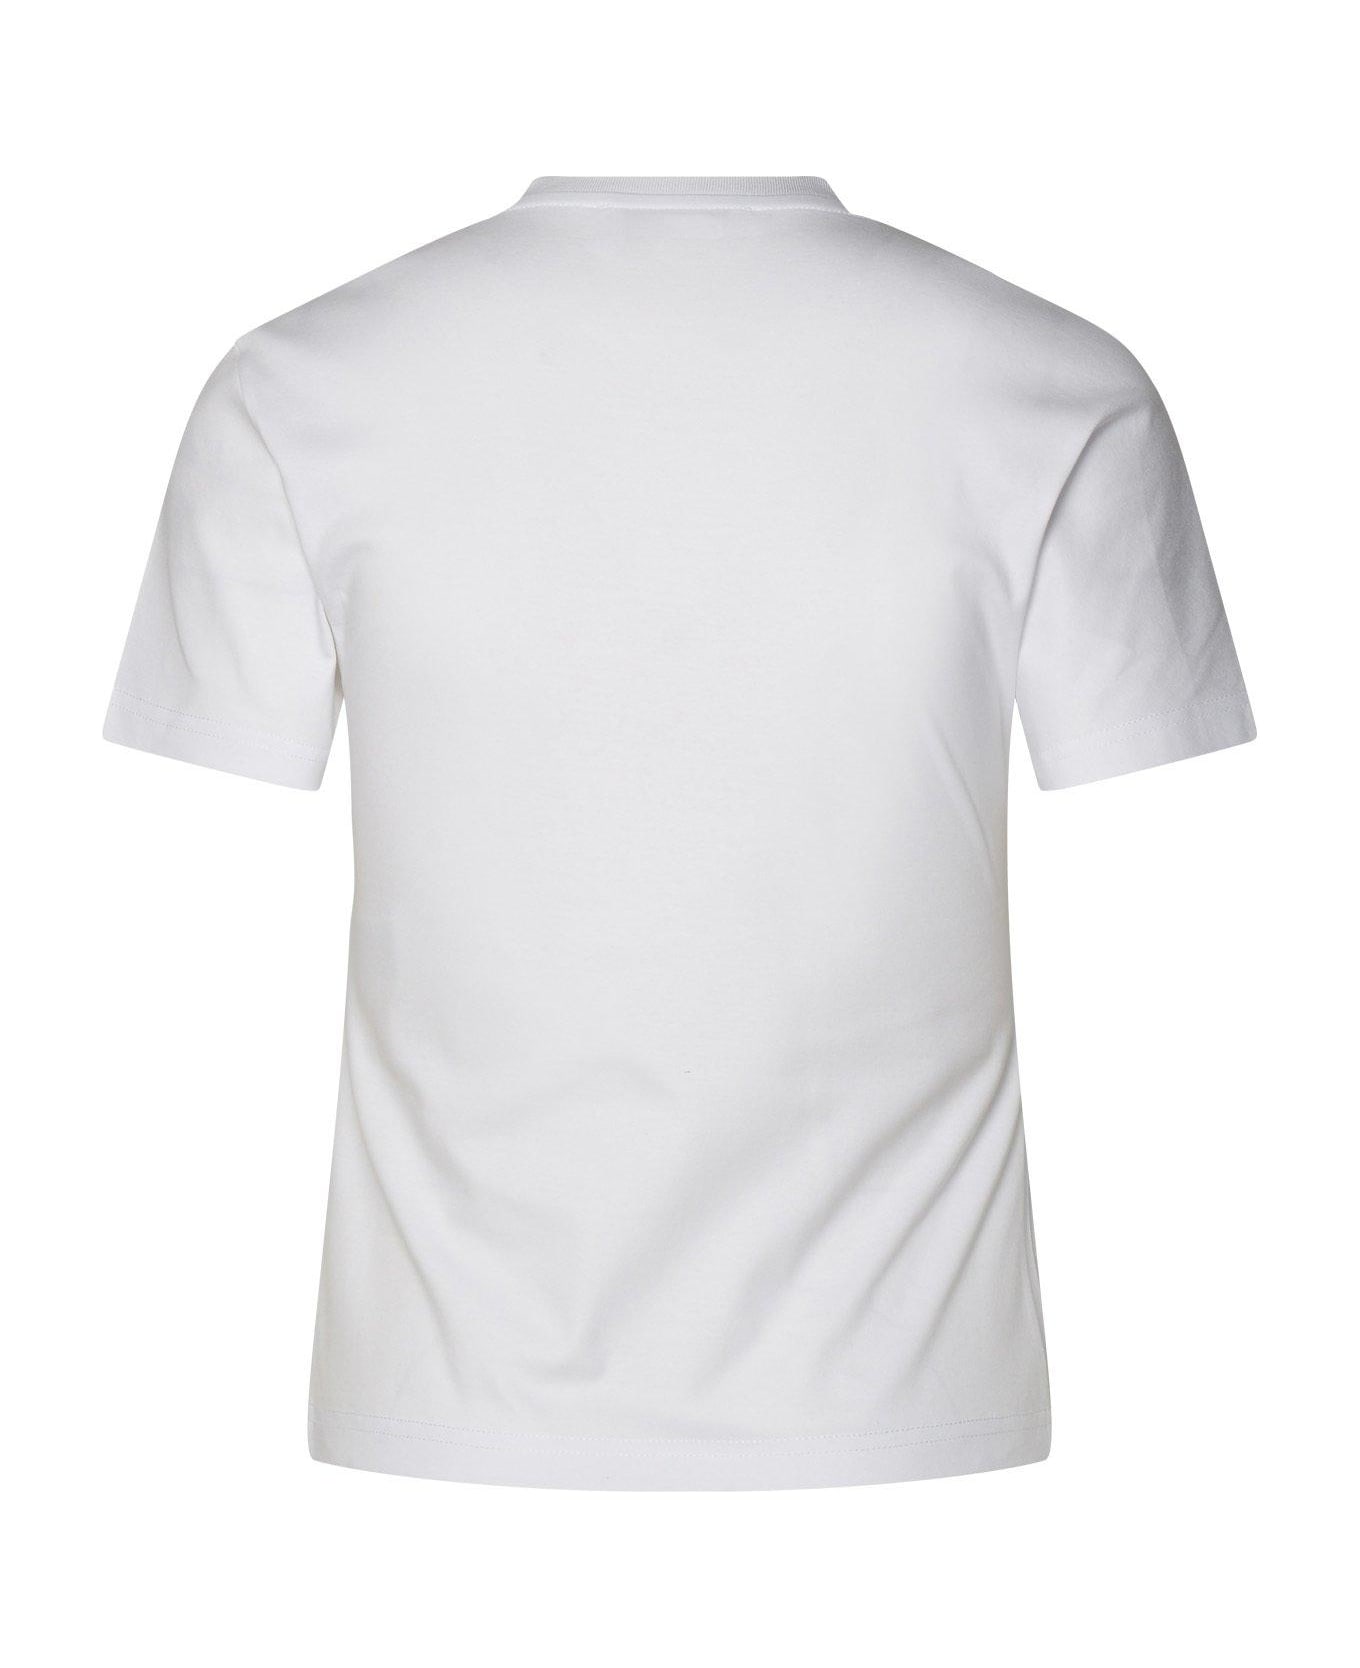 Lanvin Cut-out Short-sleeved T-shirt - WHITE